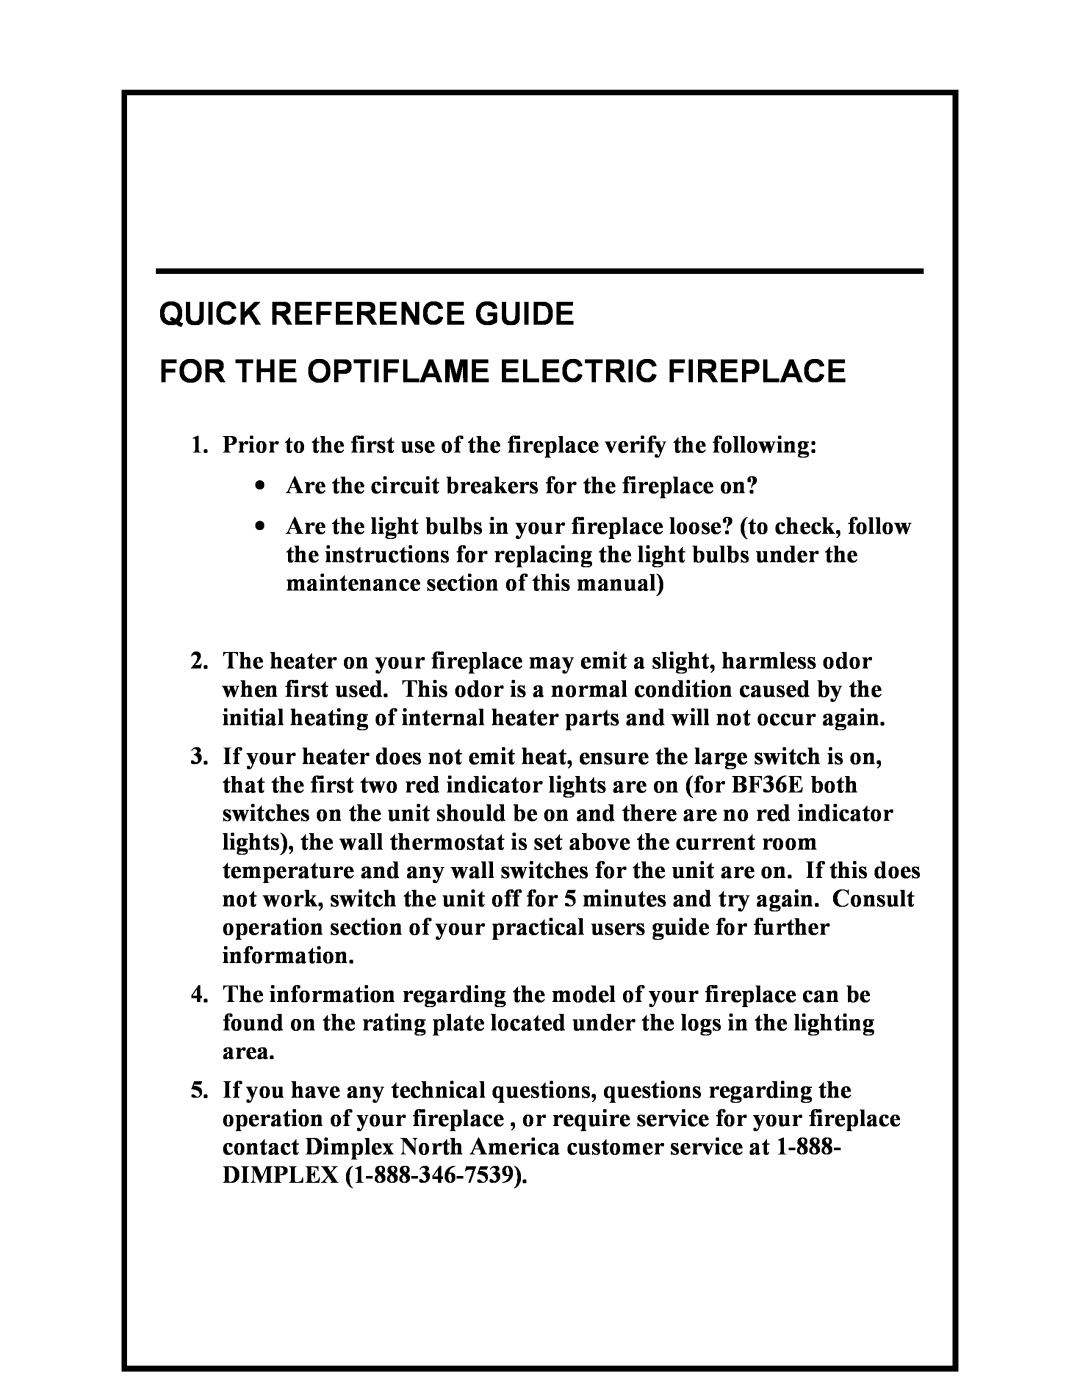 Dimplex manual Quick Reference Guide, For The Optiflame Electric Fireplace 